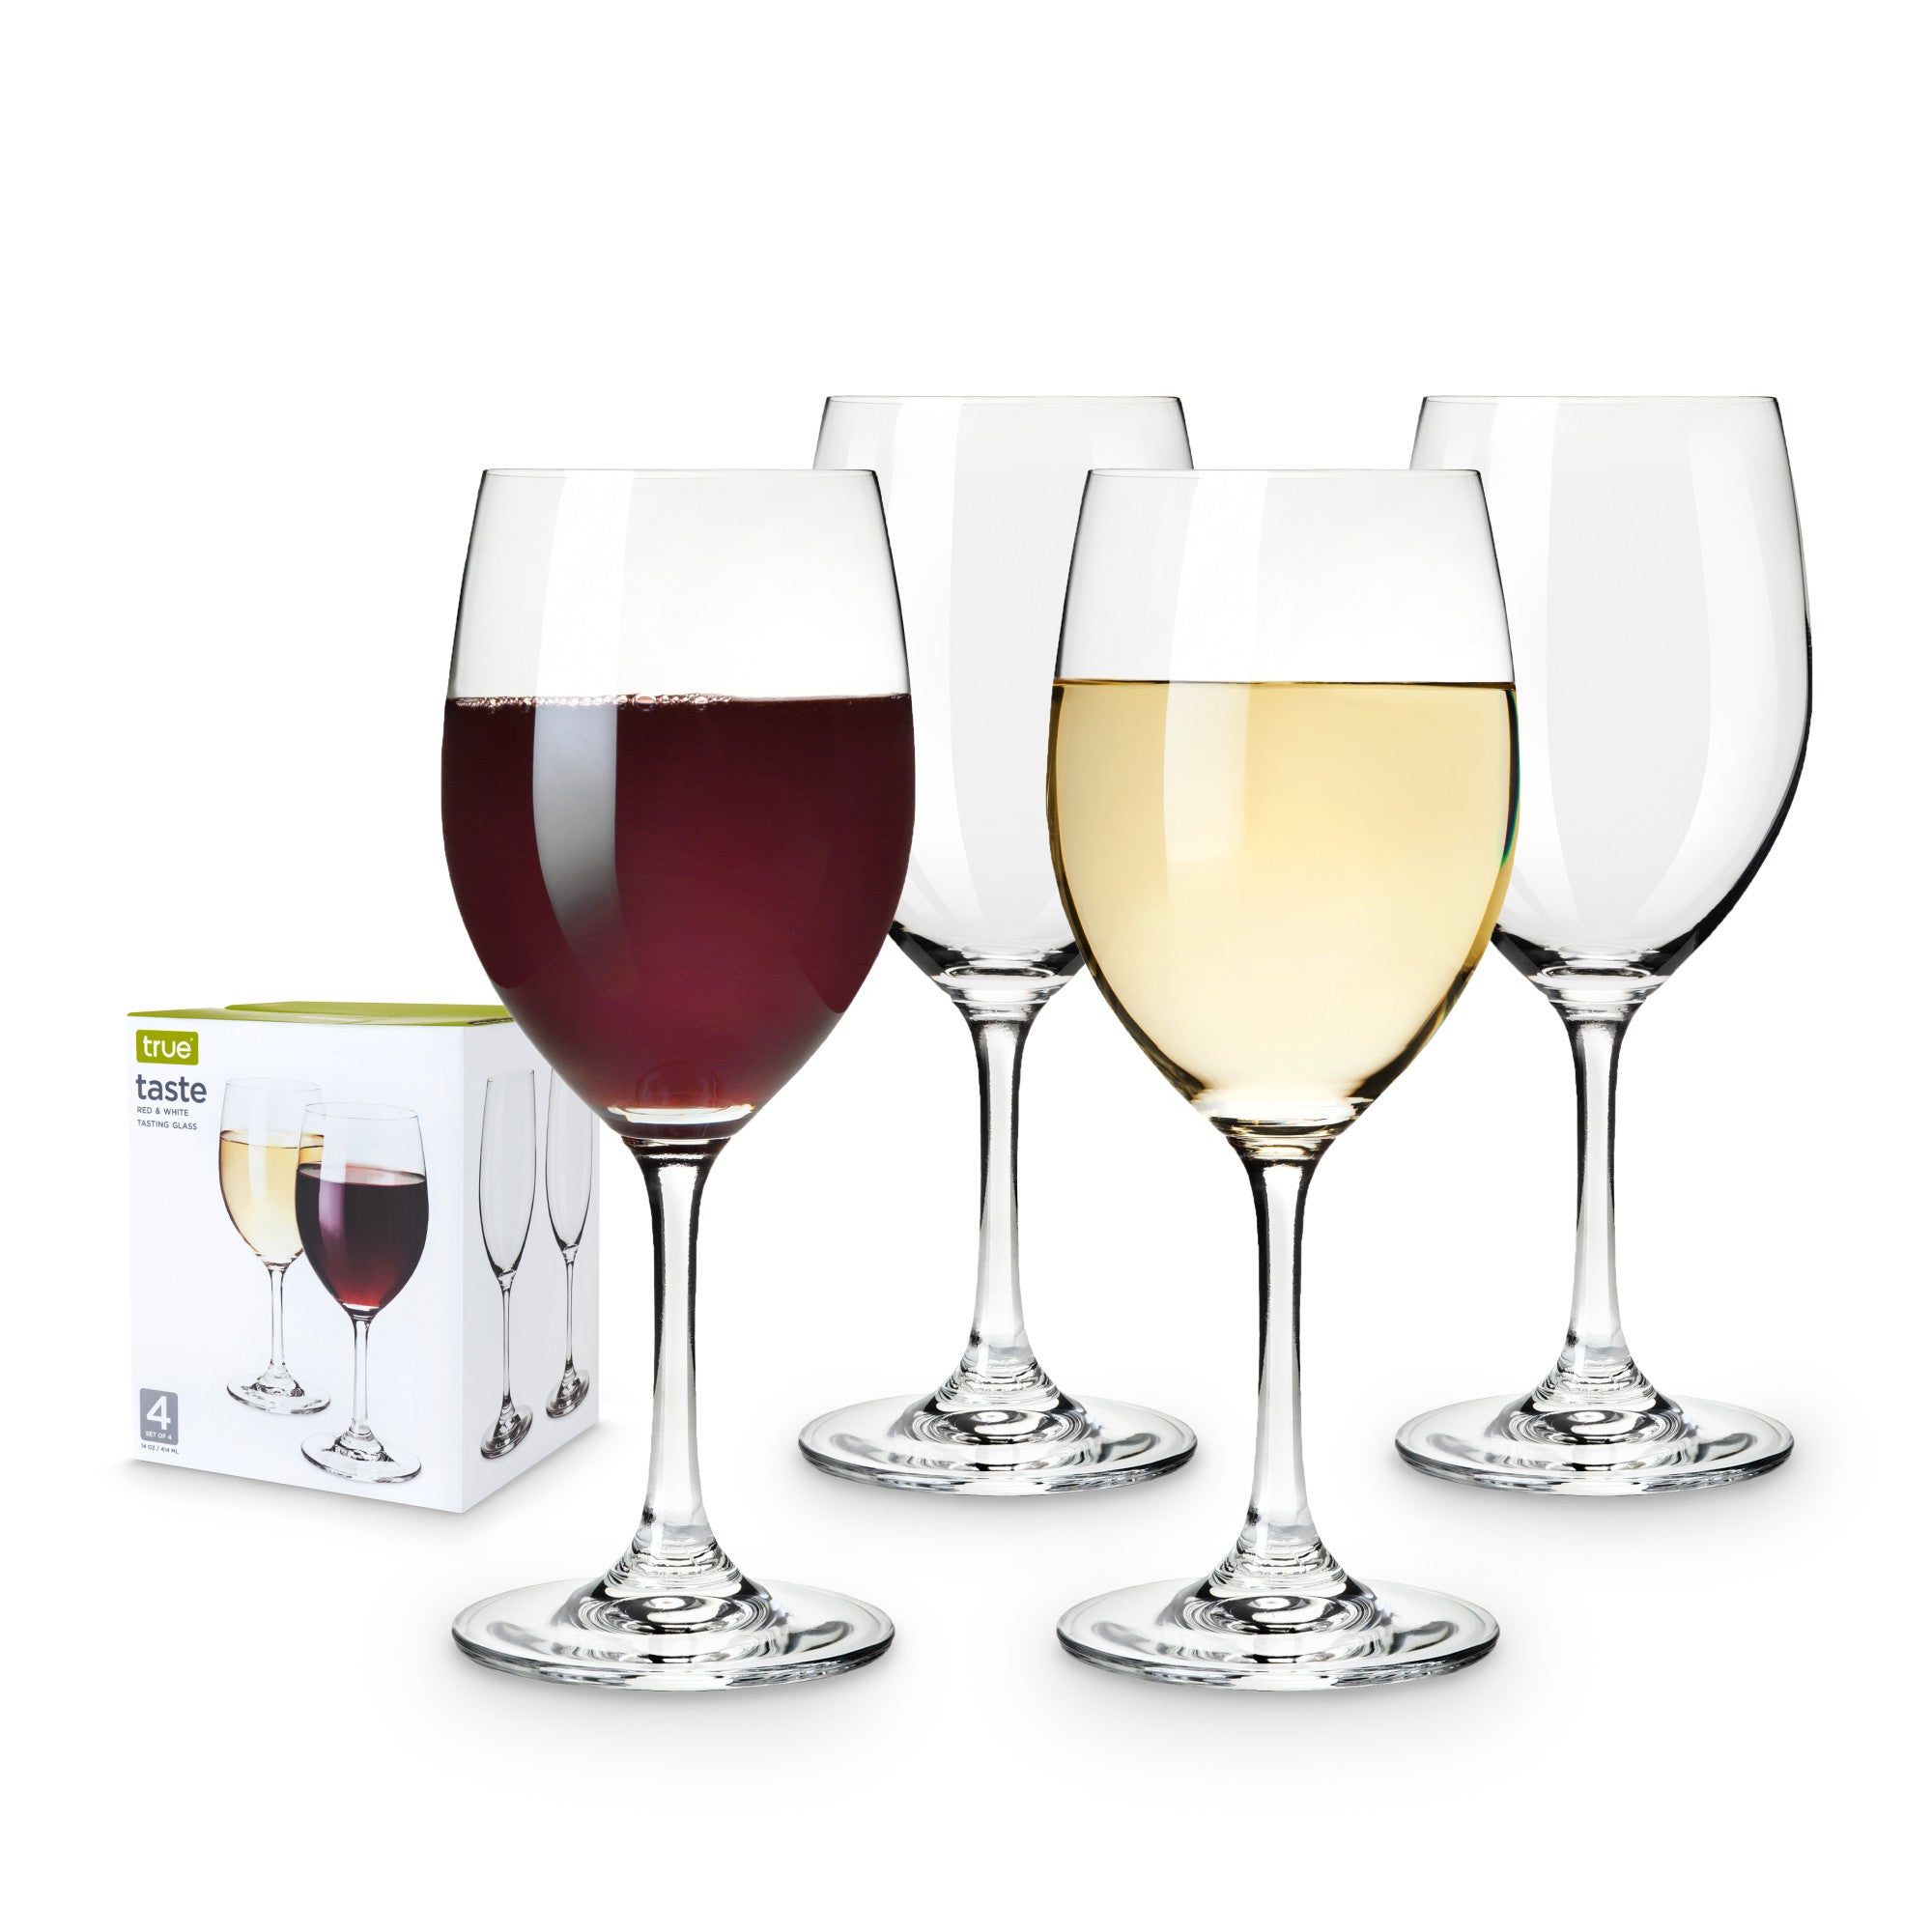 Taste Set of 4 Red And White Tasting Glass by True (2168) Drinkware True